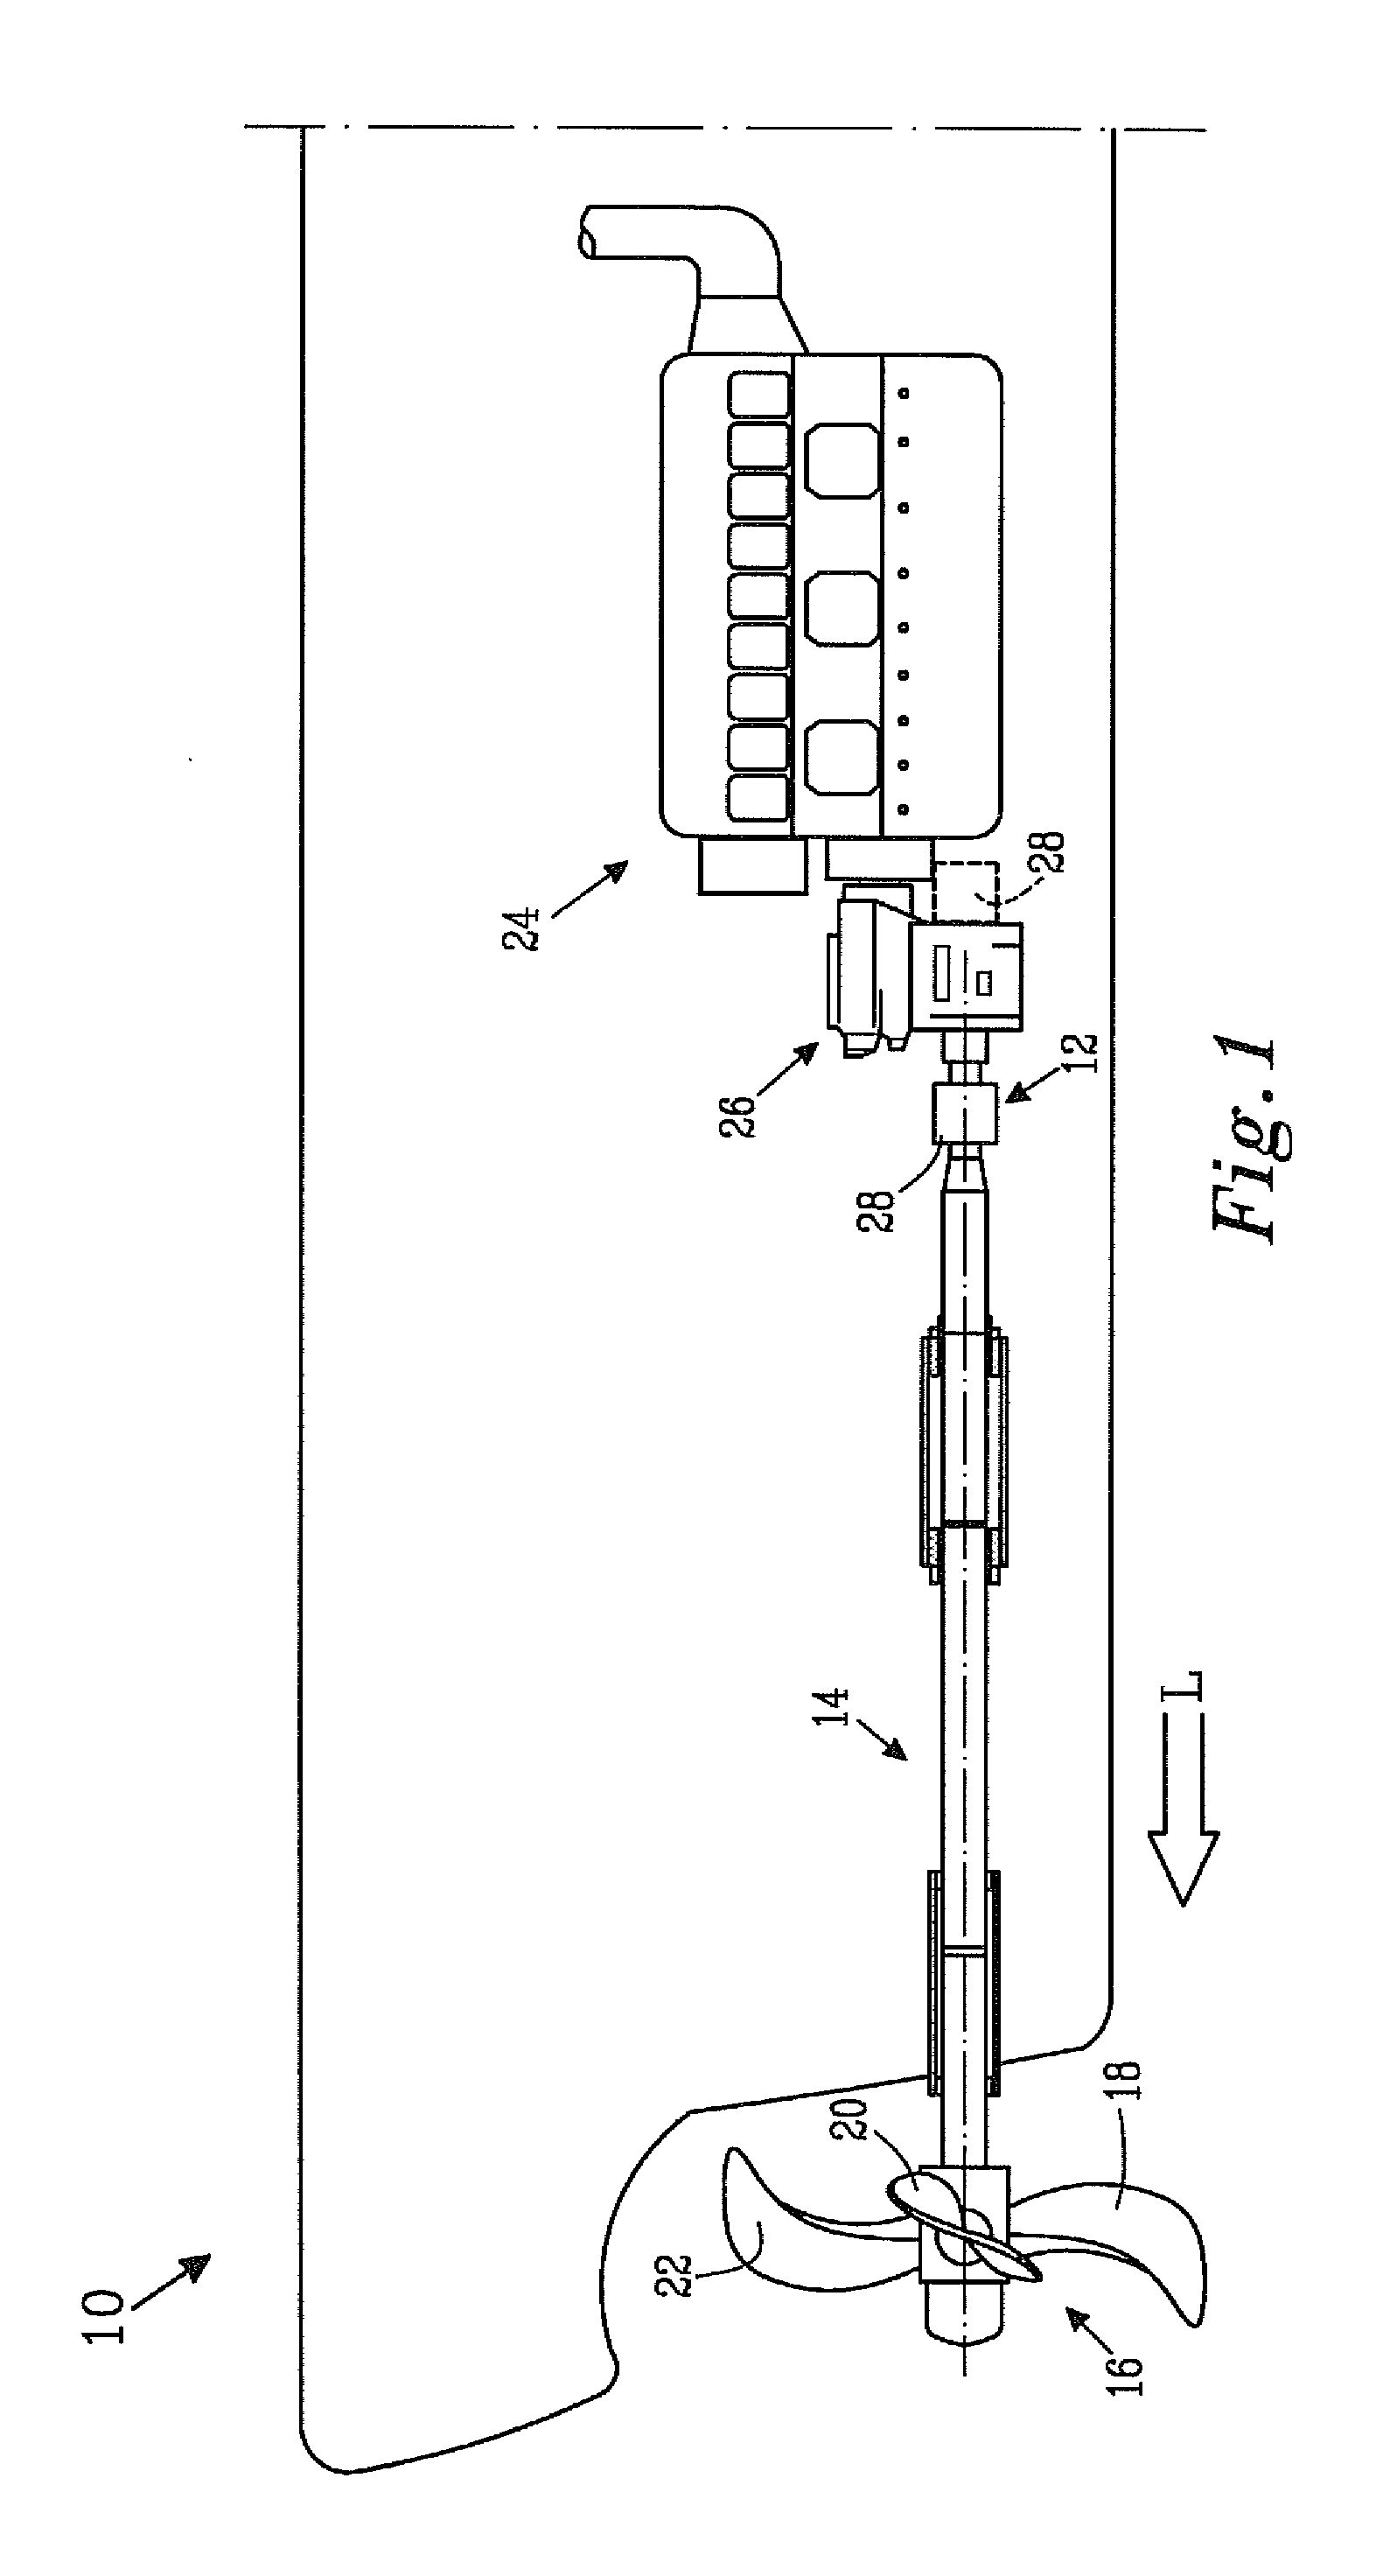 Adjustable propeller arrangement and a method of distributing fluid to and/or from such an adjustable propeller arrangement